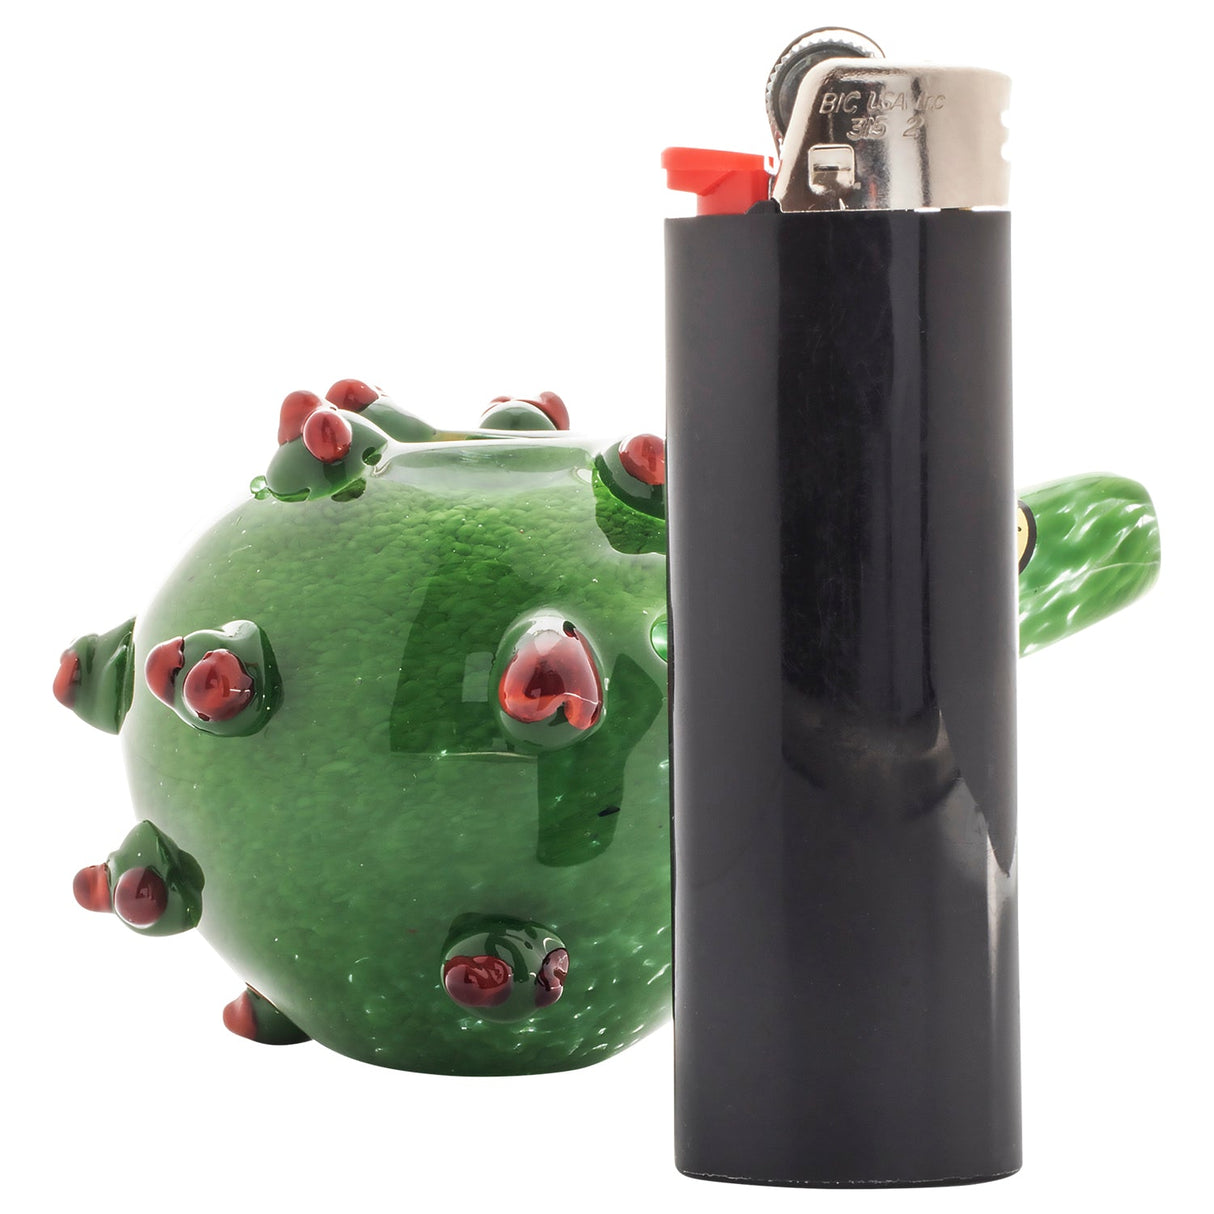 LA Pipes "Corona Rona" Green Hand Pipe with Red Accents - Side View with Lighter